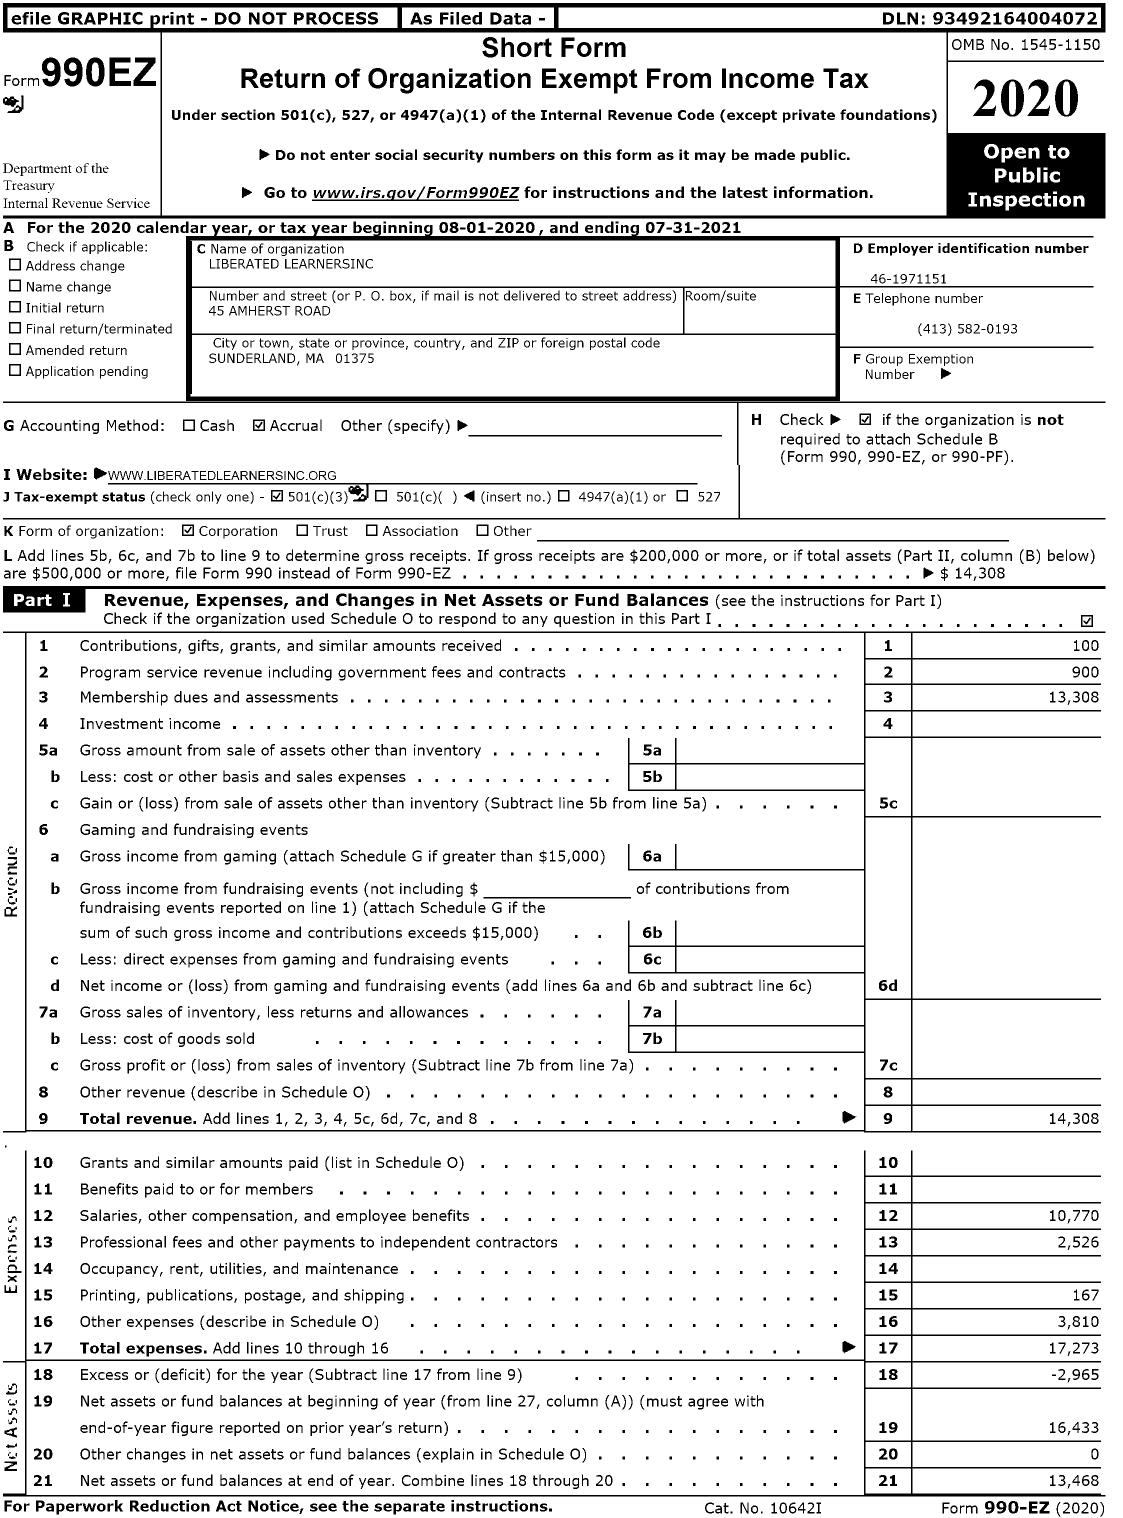 Image of first page of 2020 Form 990EZ for Liberated Learnersinc